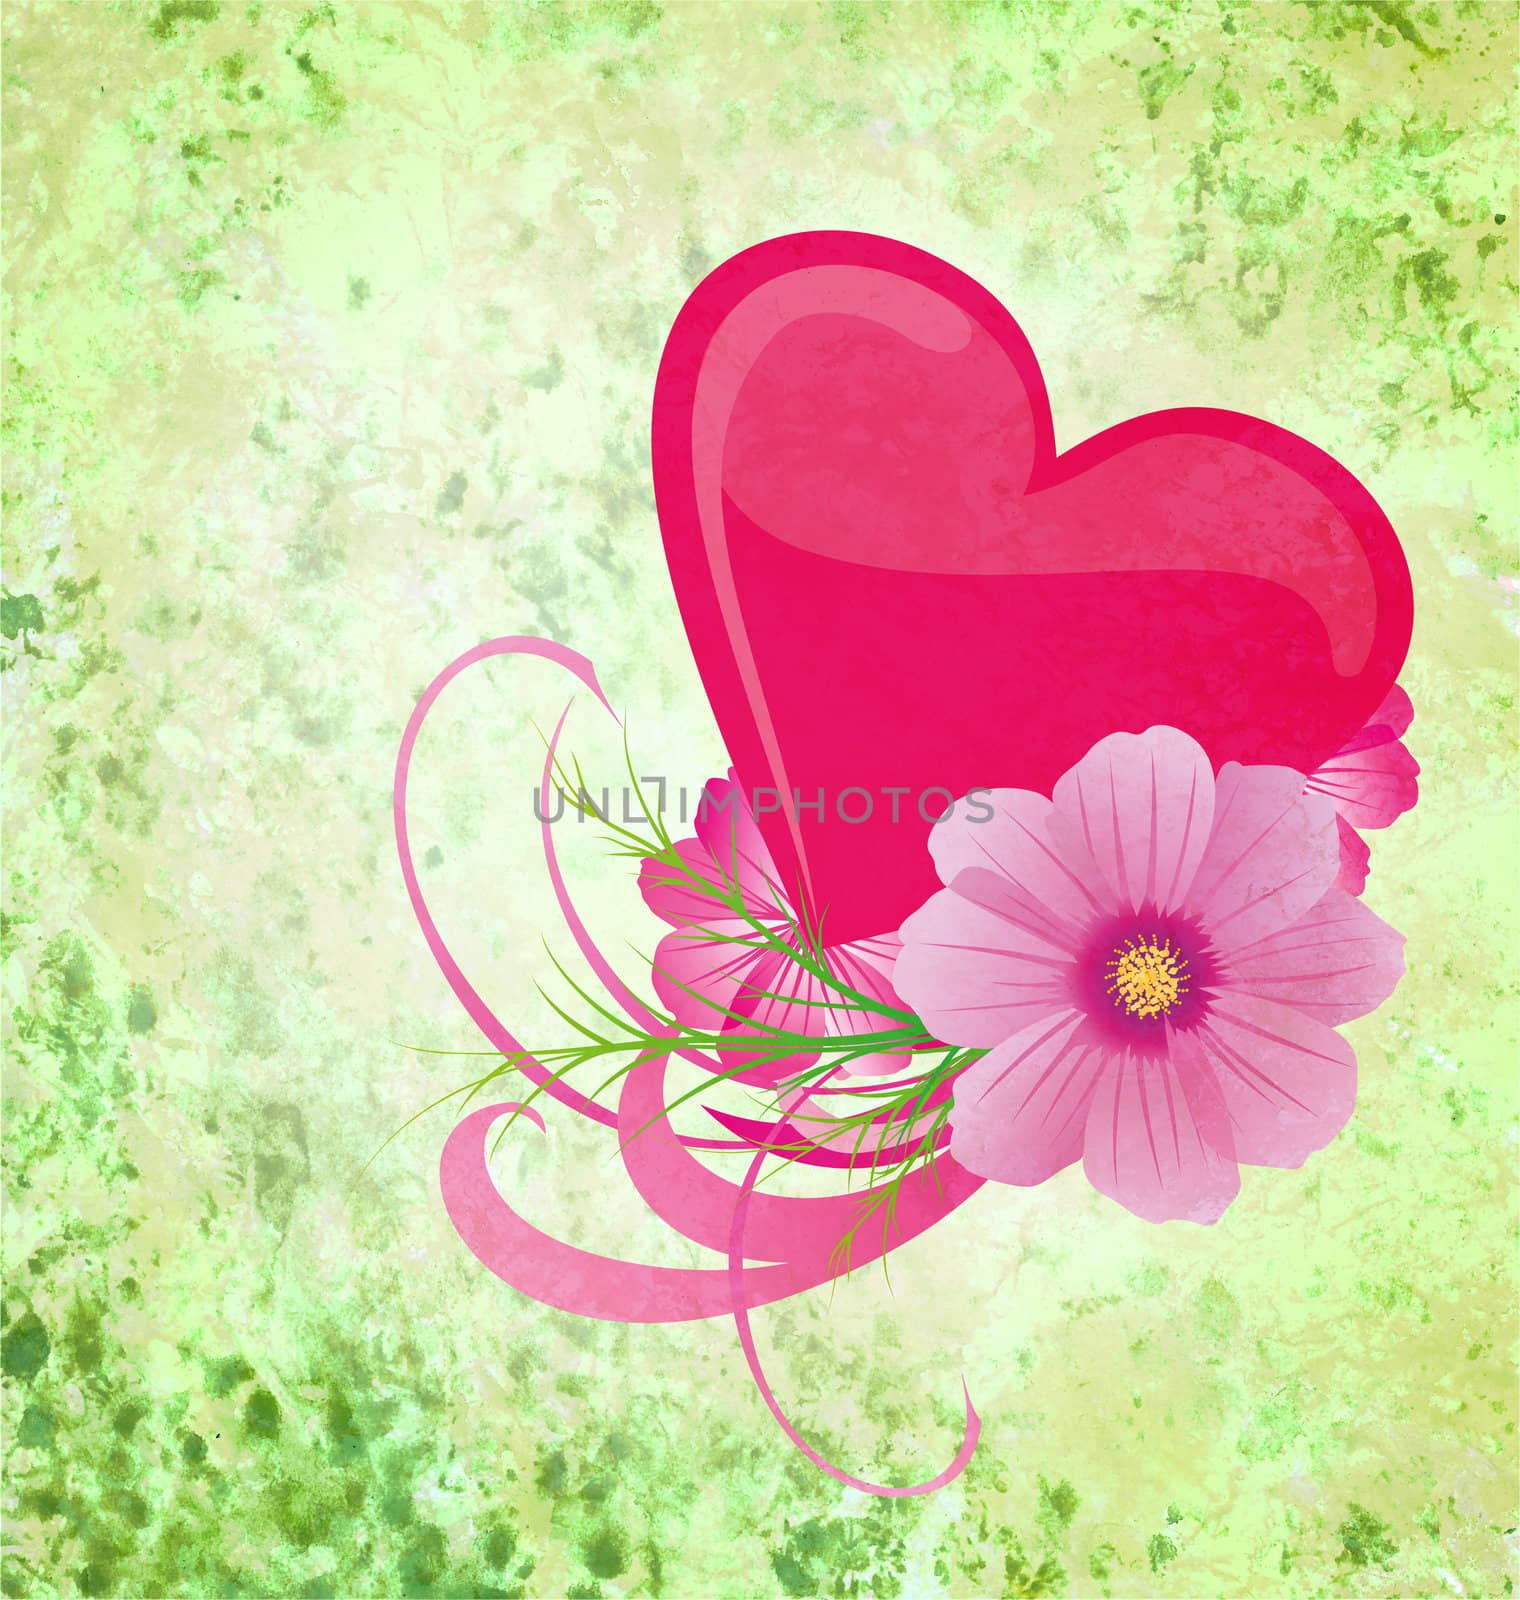 green grunge background with purple and pink heart and flowers by CherJu